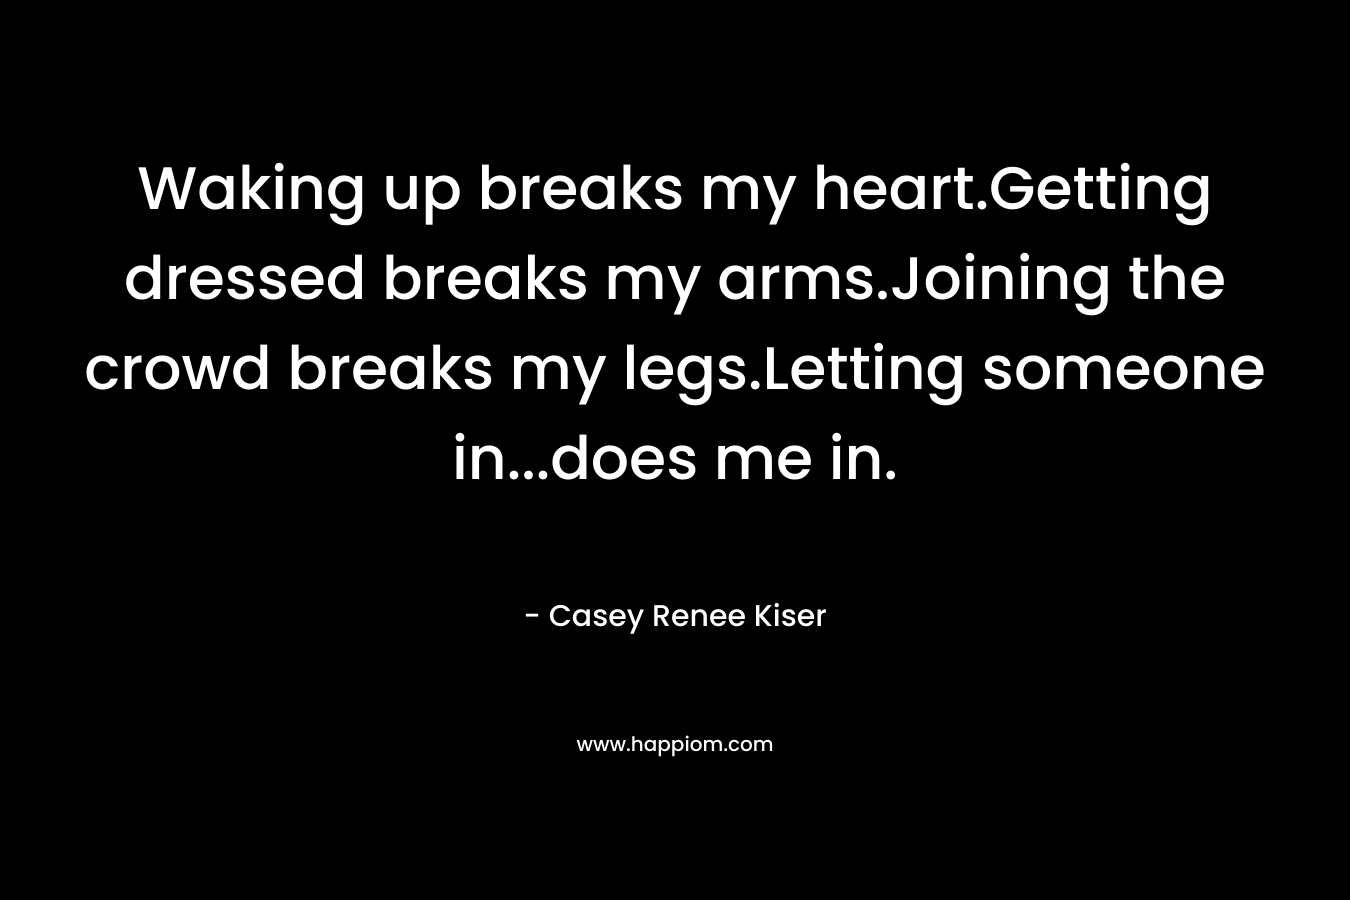 Waking up breaks my heart.Getting dressed breaks my arms.Joining the crowd breaks my legs.Letting someone in…does me in. – Casey Renee Kiser